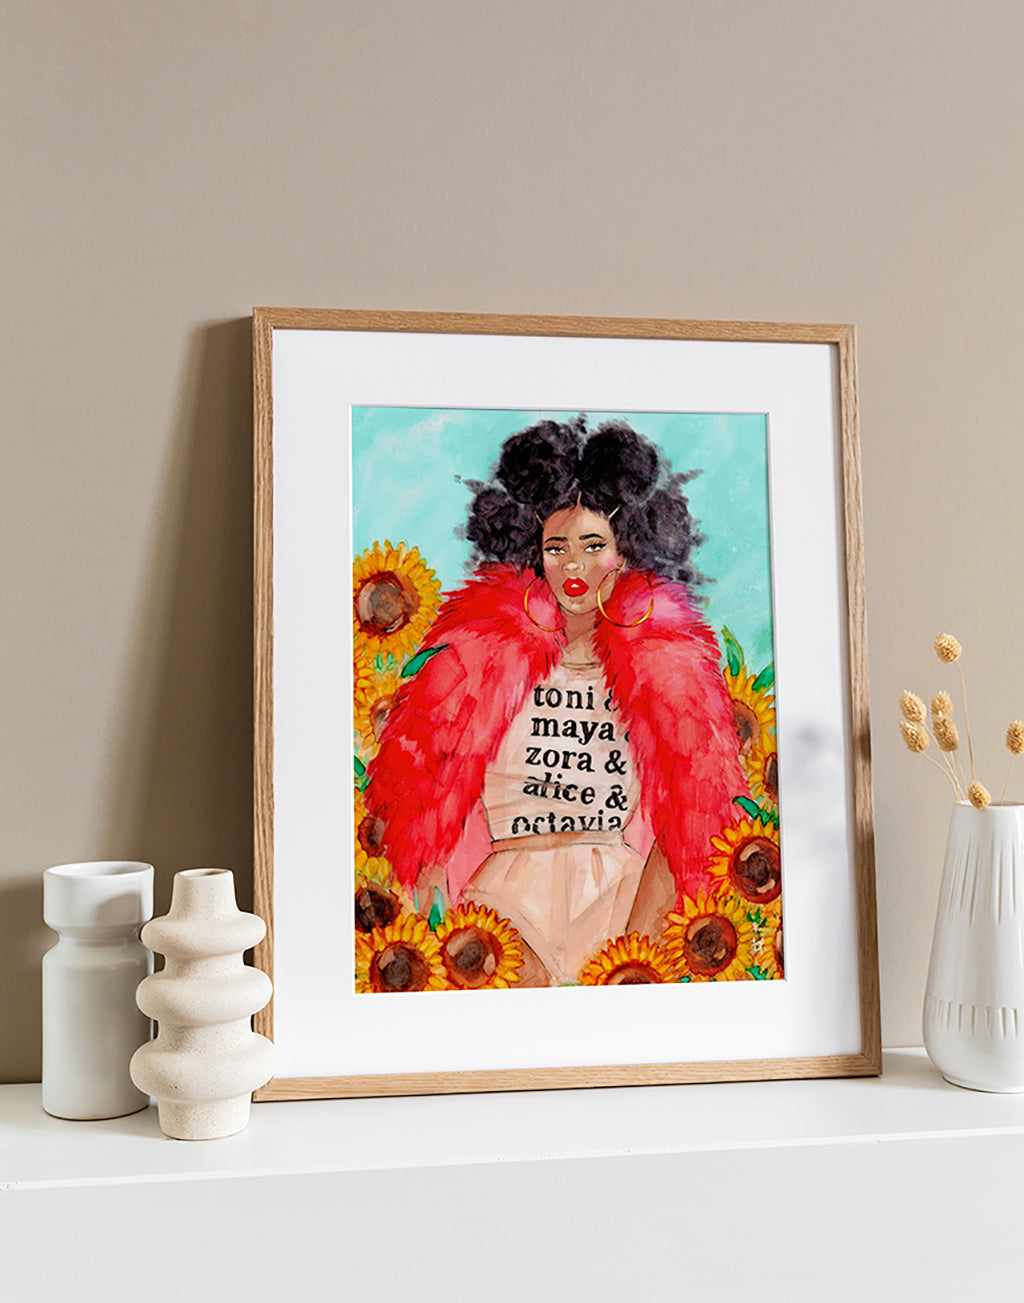 Illustration in a light frame of a beautiful black woman wearing a red fur and a toni morrisson tee sitting amongst  sunflowers by Tatiana Poblah